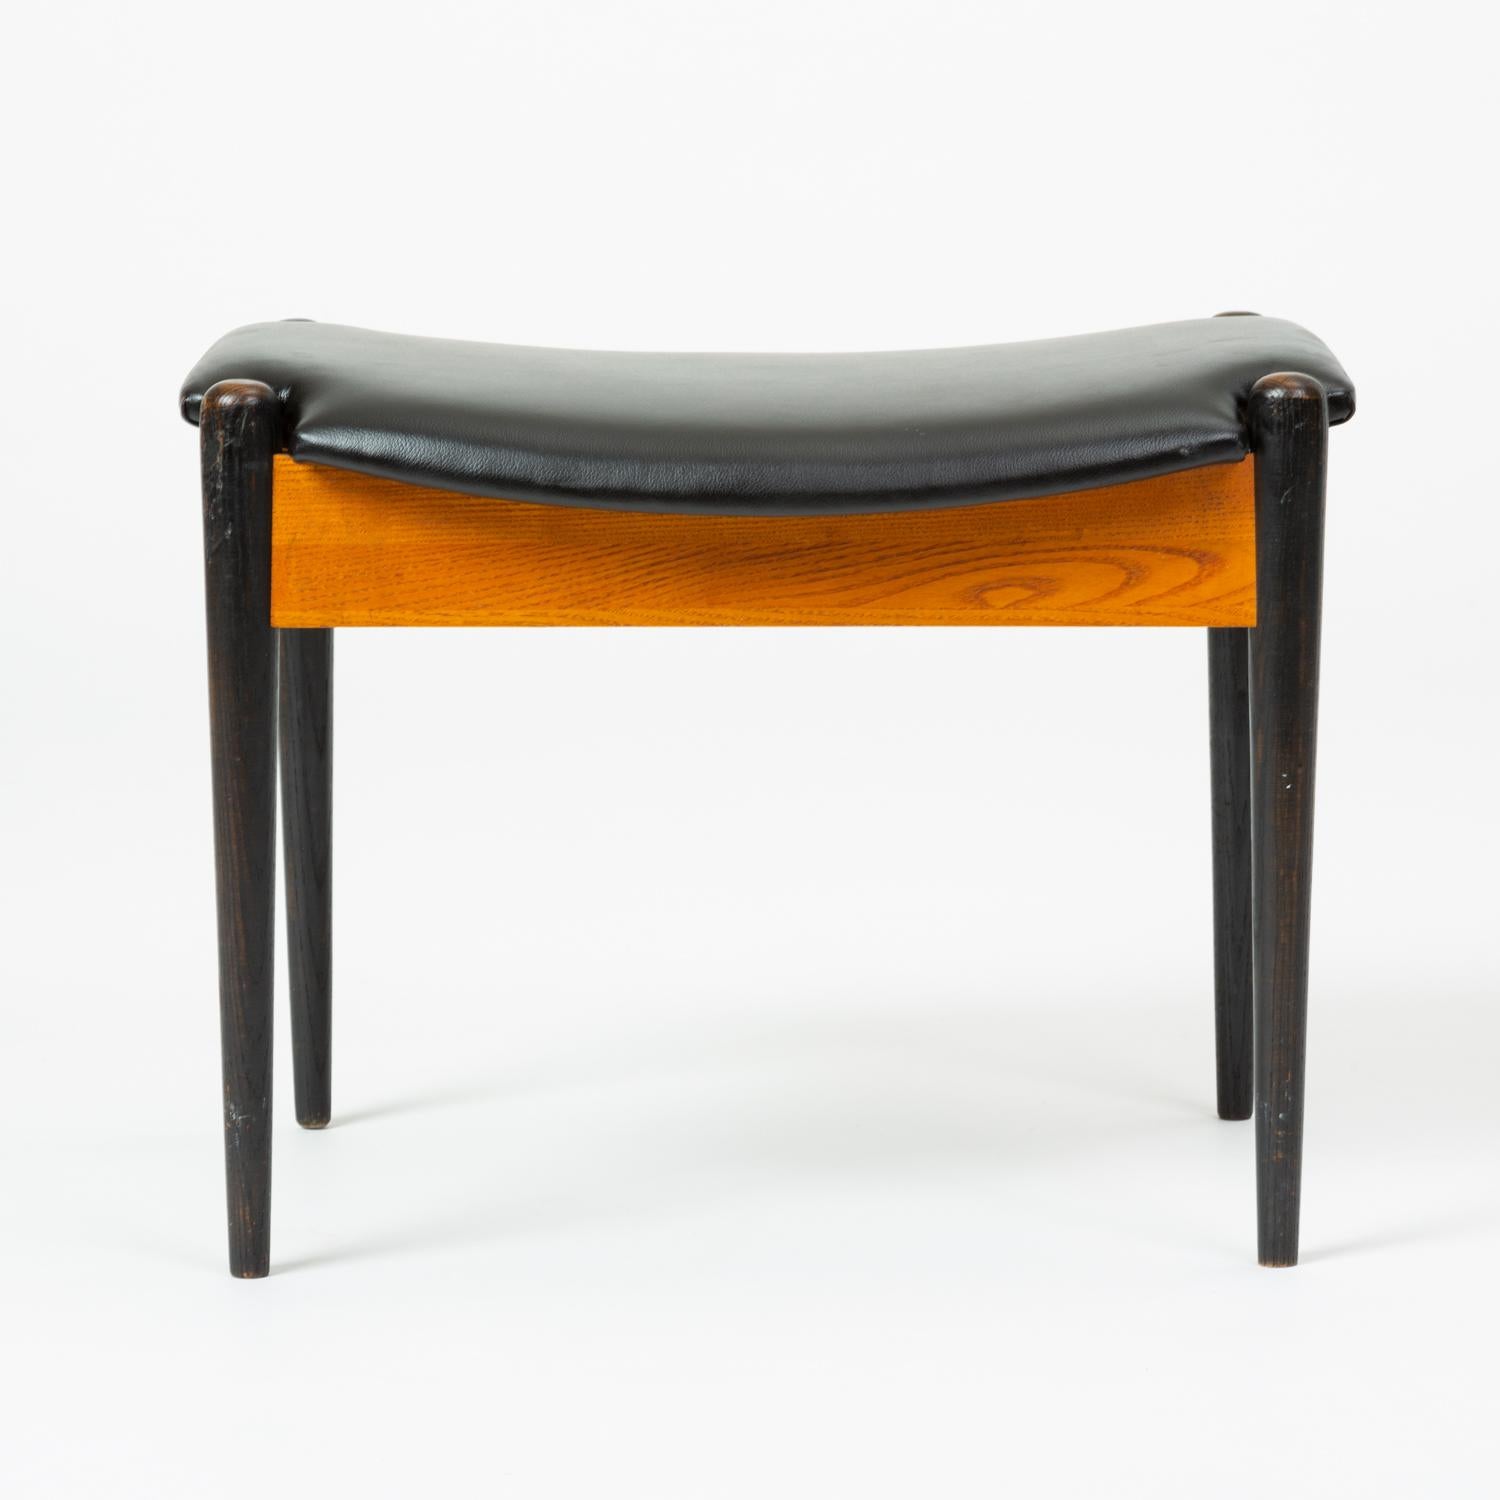 Marketed as the #3007 “Single Bench” in 1965, this versatile design by Arthur Umanoff functions as a stool, ottoman, or children’s seating. A hallmark of this series for Washington Woodcraft, tapered dowel legs with rounded upper ends sit at each